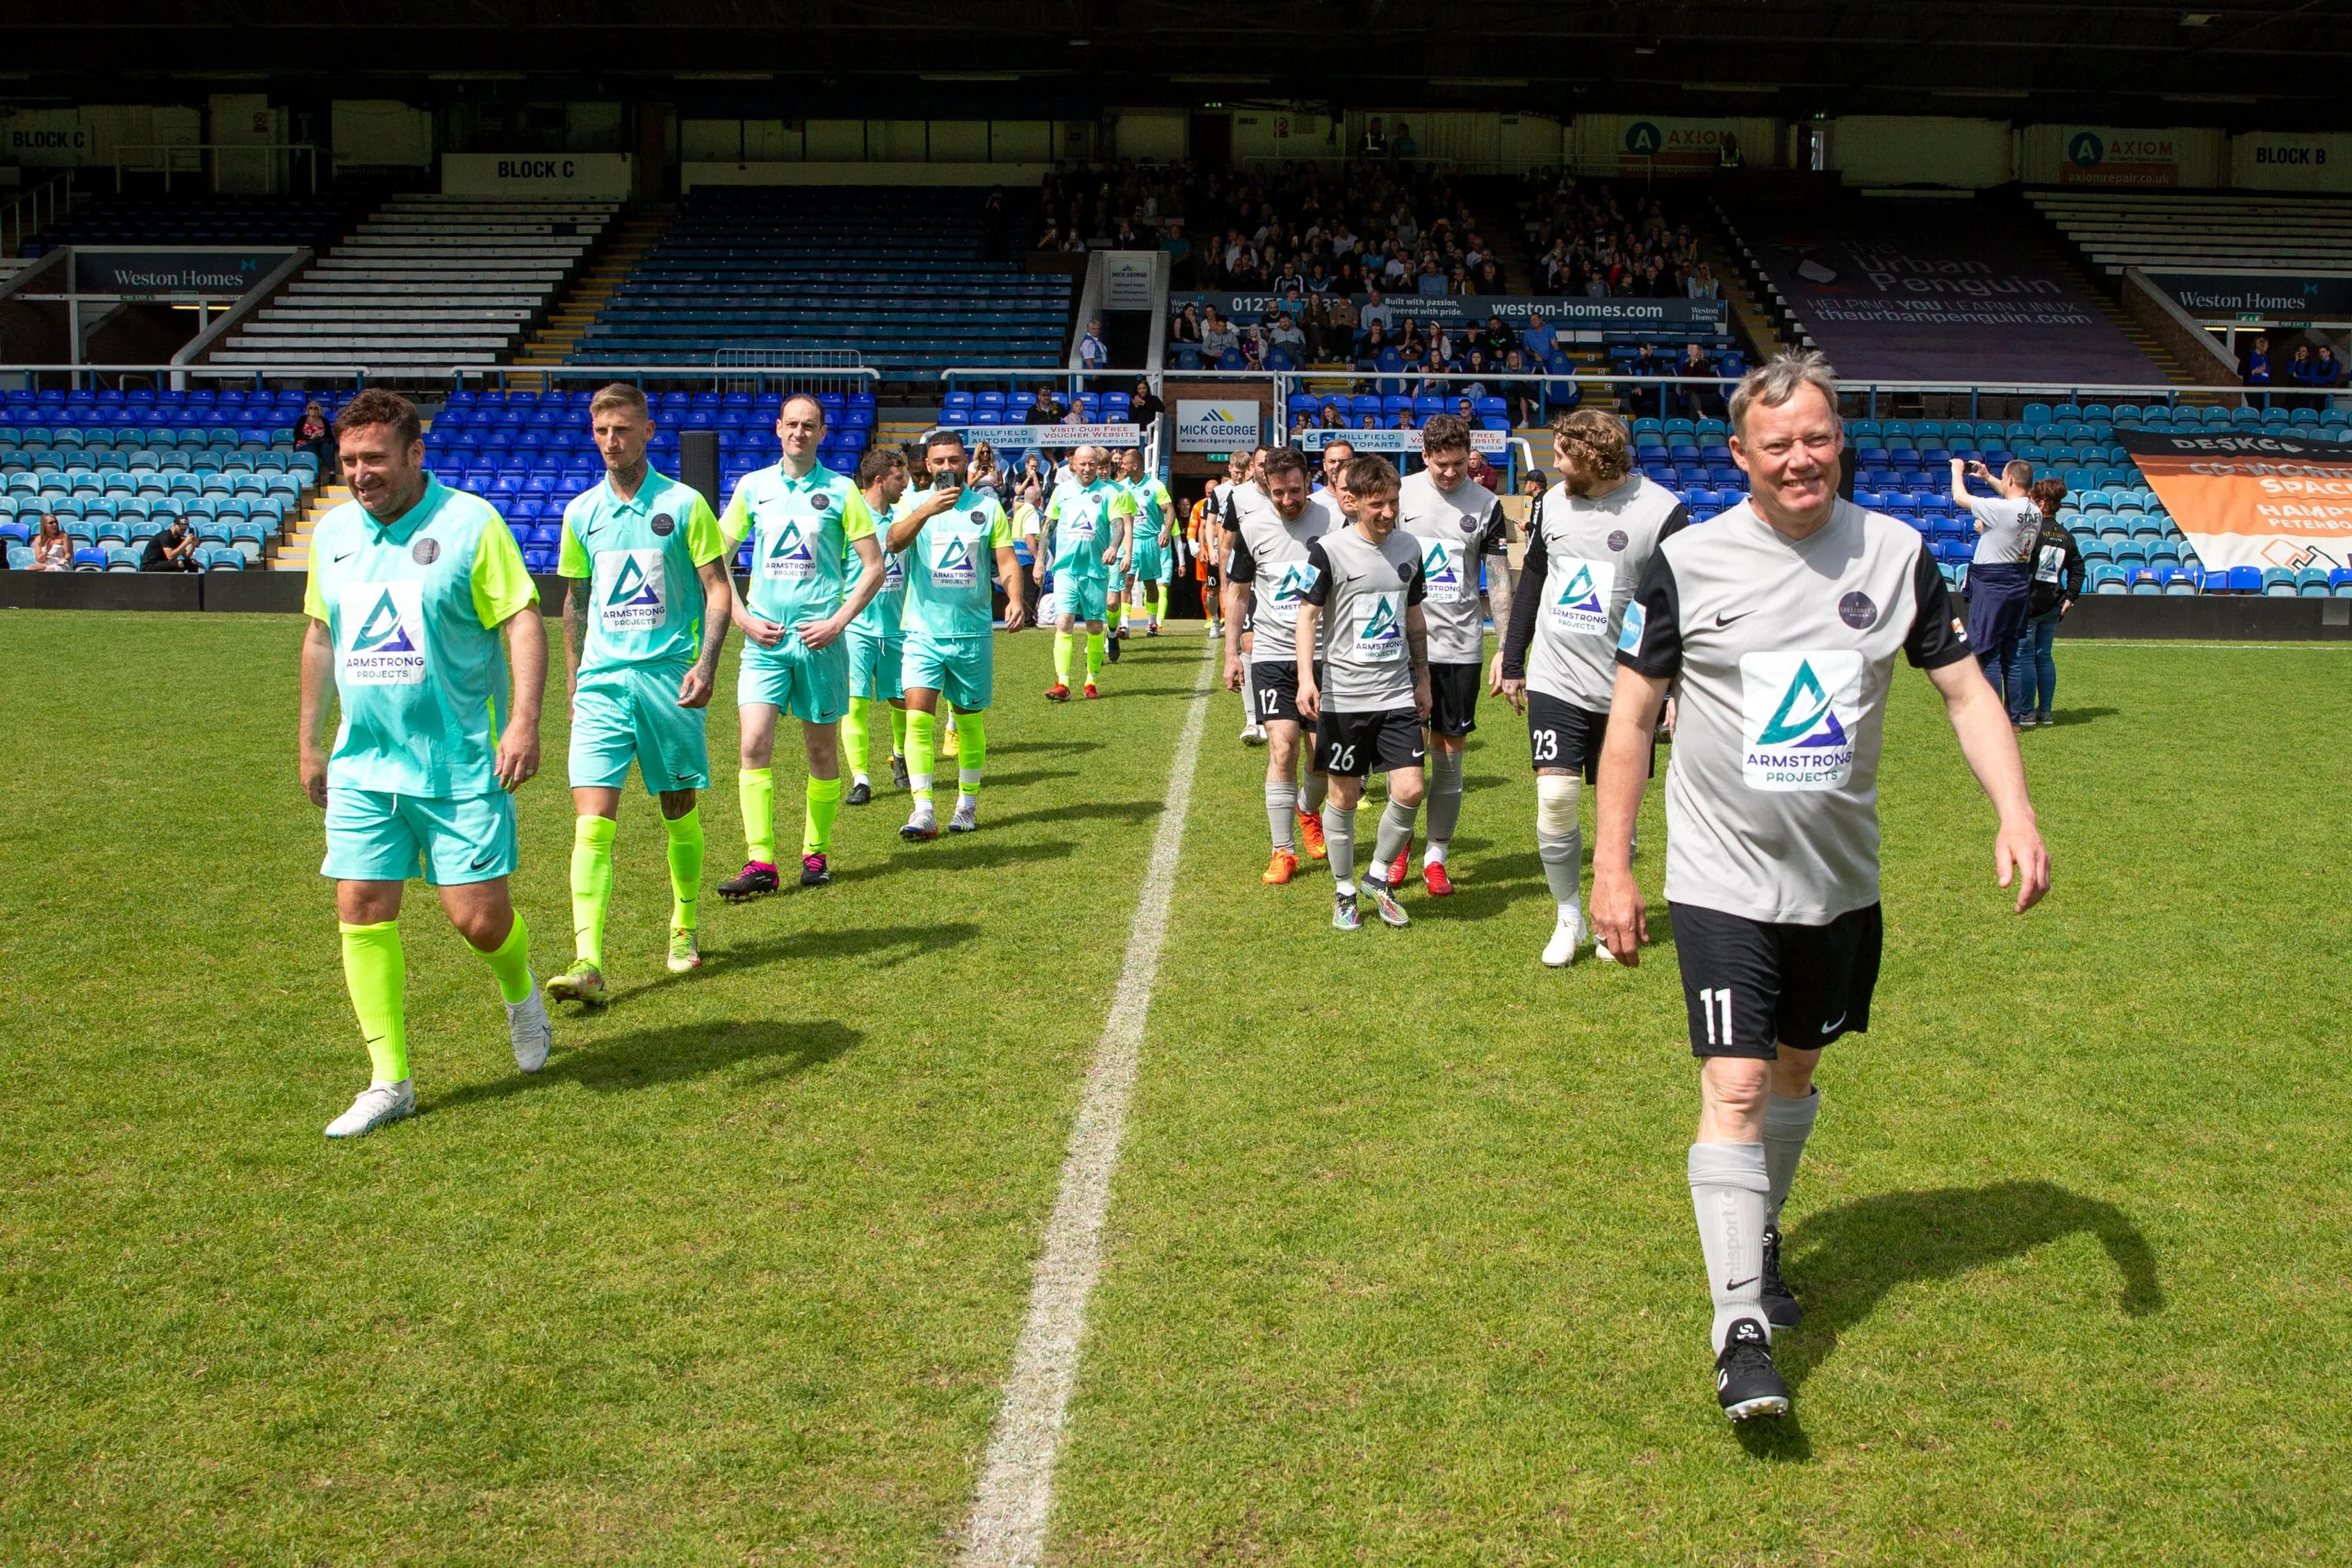 Danny Dyer and James Arthur take part in Sellebrity football match for charity (AMR - Action Medical Research), Weston Homes Stadium, Peterborough, Monday 29 May 2023. PHOTO: Terry Harris.